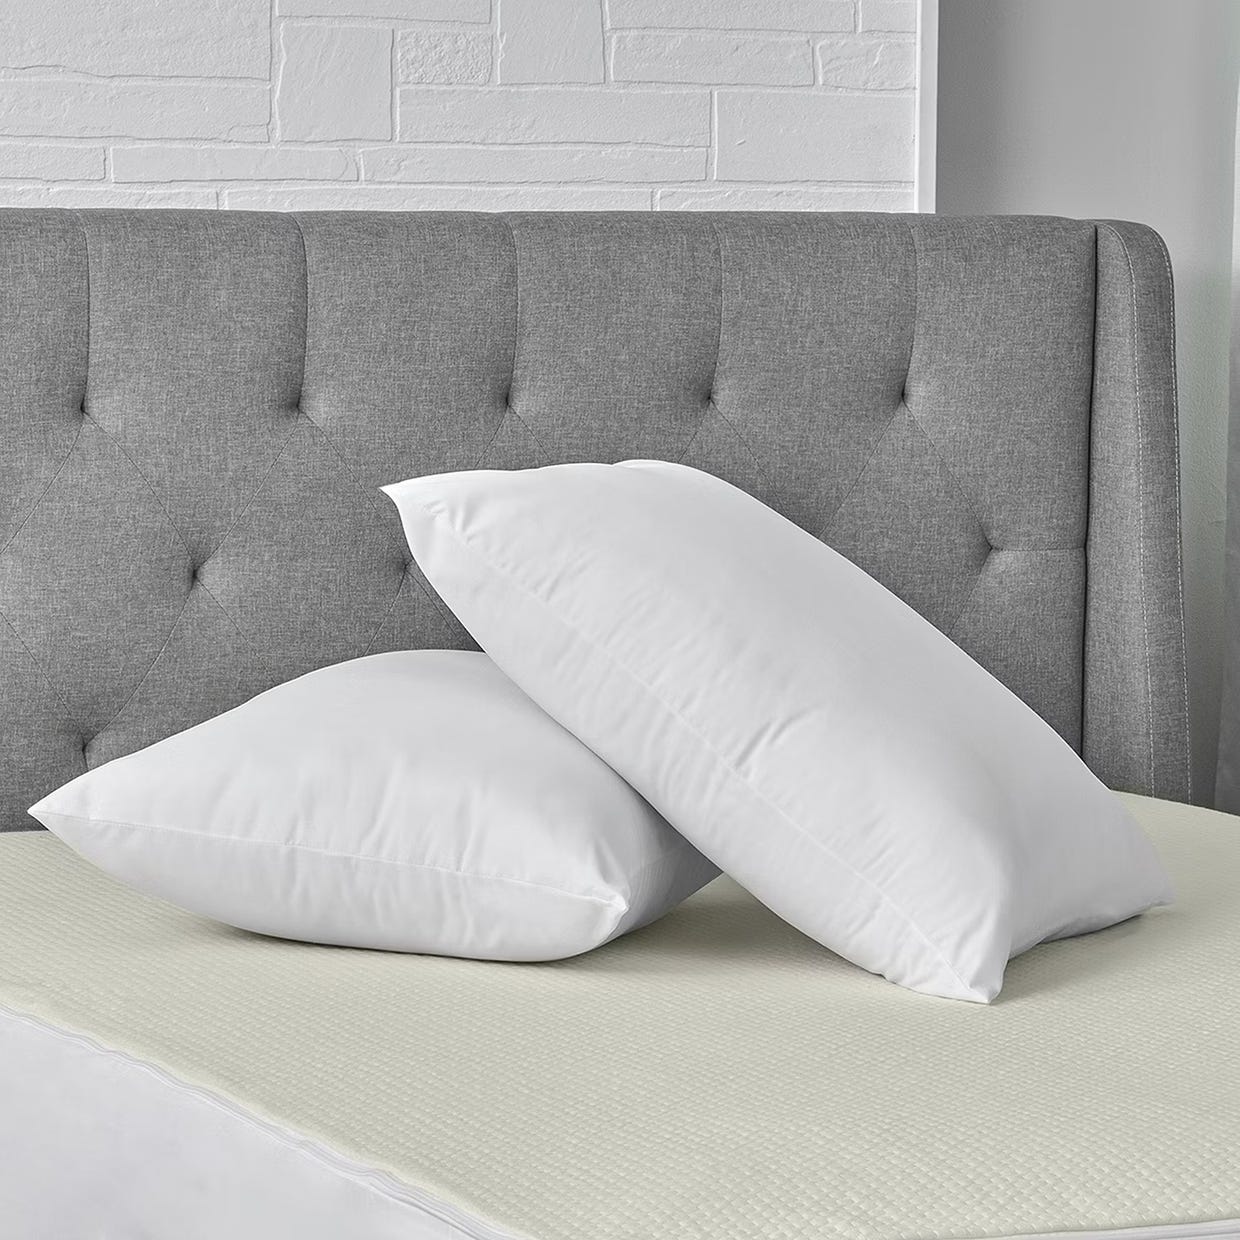 Two white pillows on a bed with a grey tufted headboard and a white brick wall in the background.